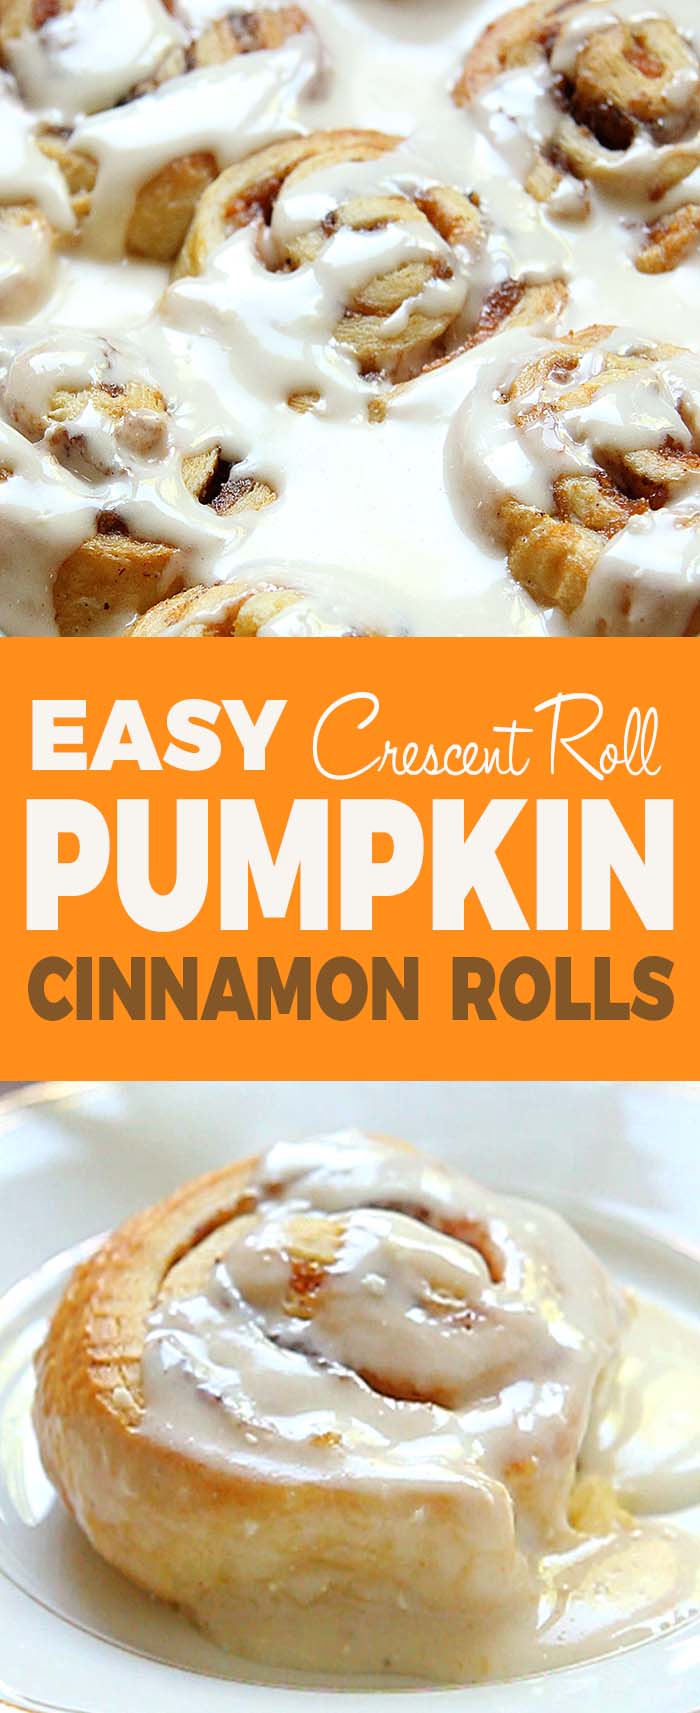 Skip the yeast, and dough....try Easy Pumpkin Cinnamon Rolls made with crescent roll dough and topped with a homemade cream cheese frosting. The perfect fall breakfast!